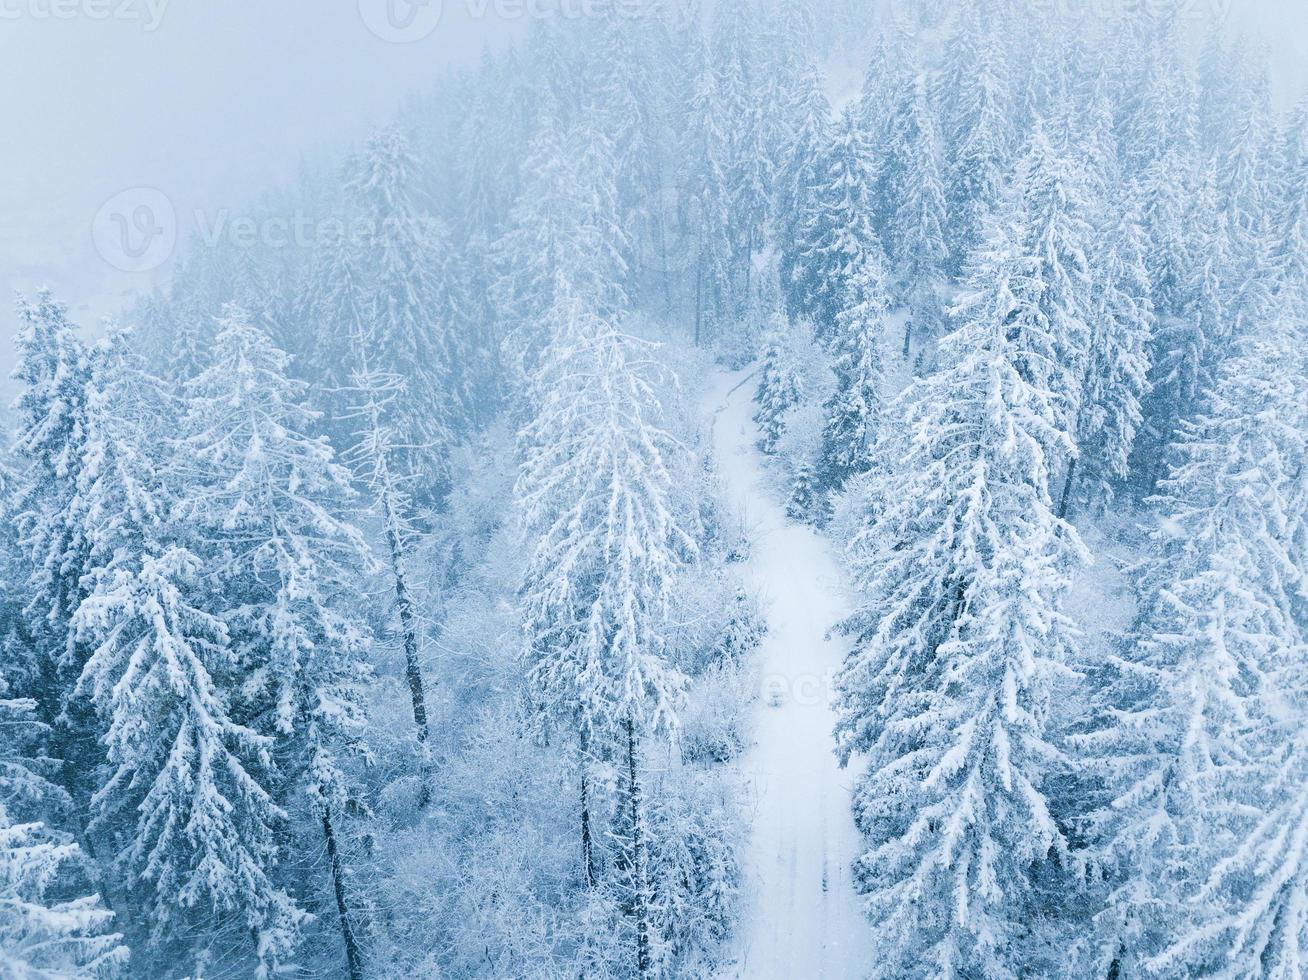 Flight over snowstorm in a snowy mountain coniferous forest, uncomfortable unfriendly winter weather. photo